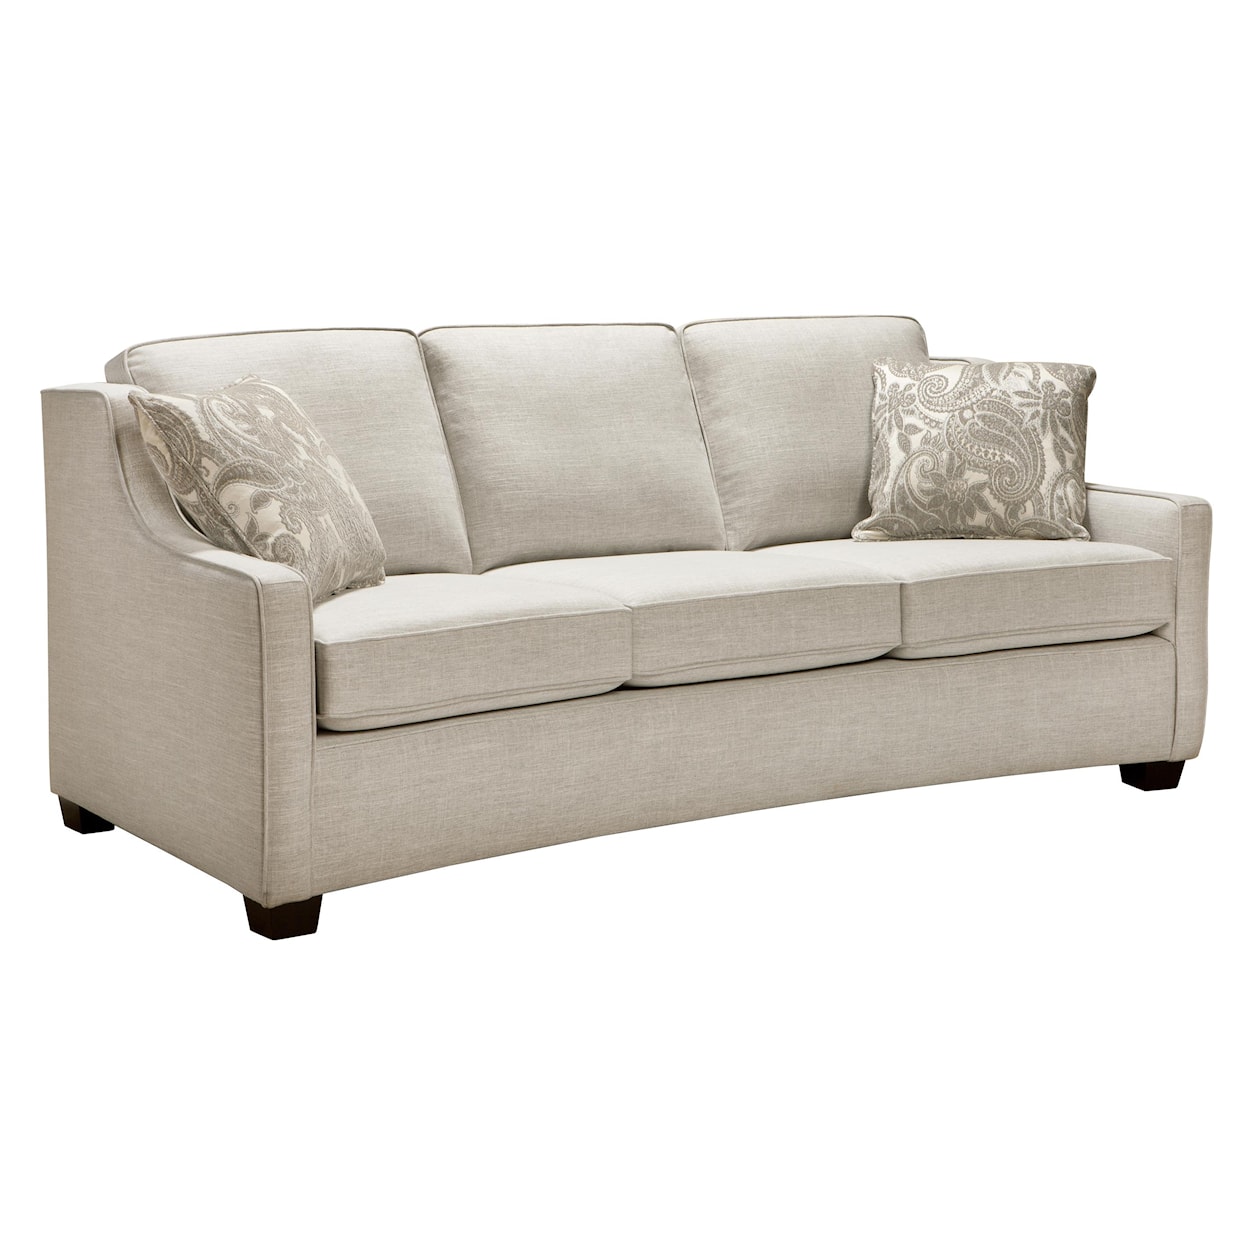 Superstyle 9670 Full Sized Sofa